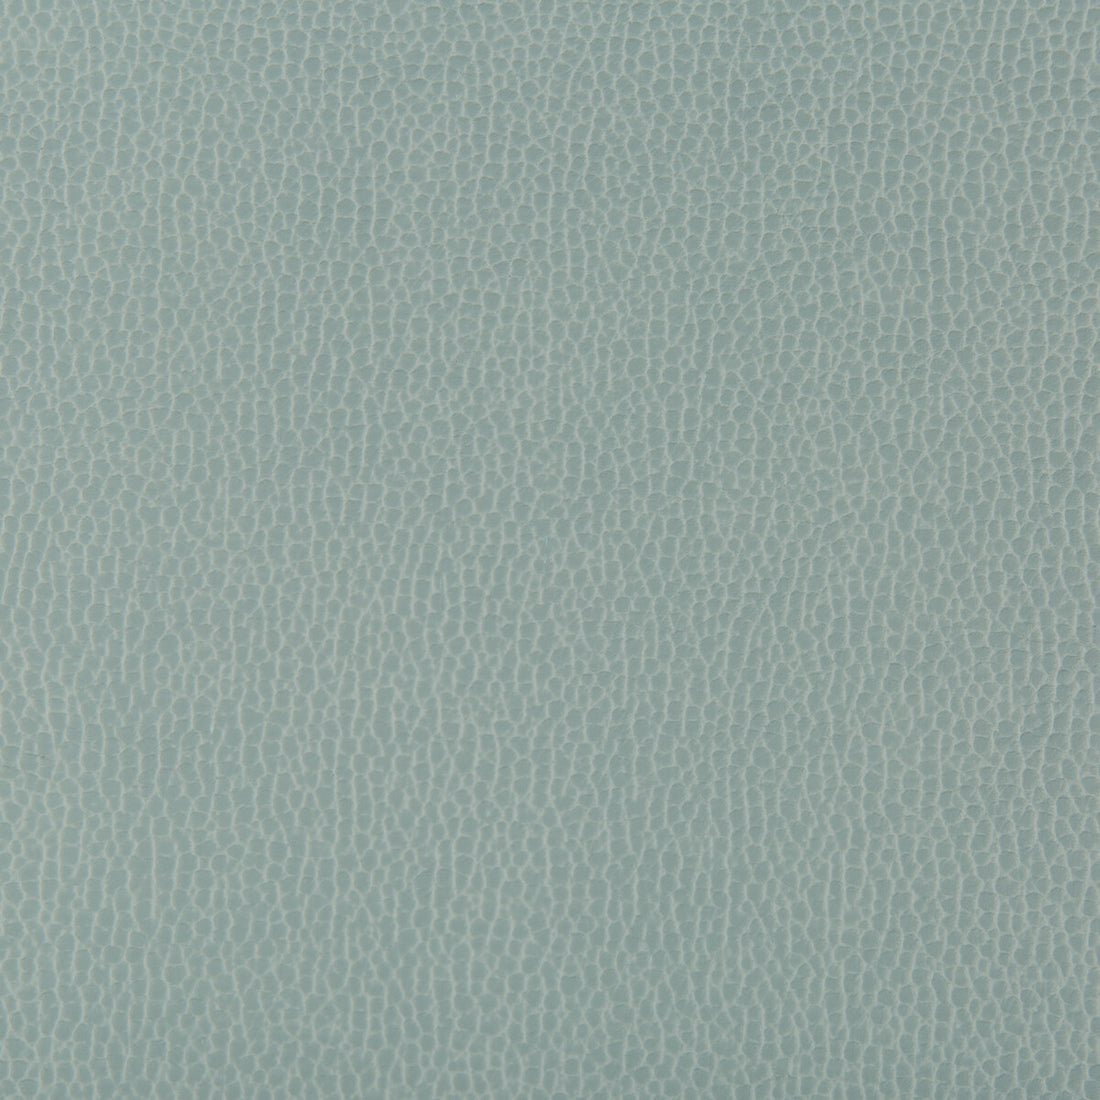 Lenox fabric in mystic color - pattern LENOX.135.0 - by Kravet Contract